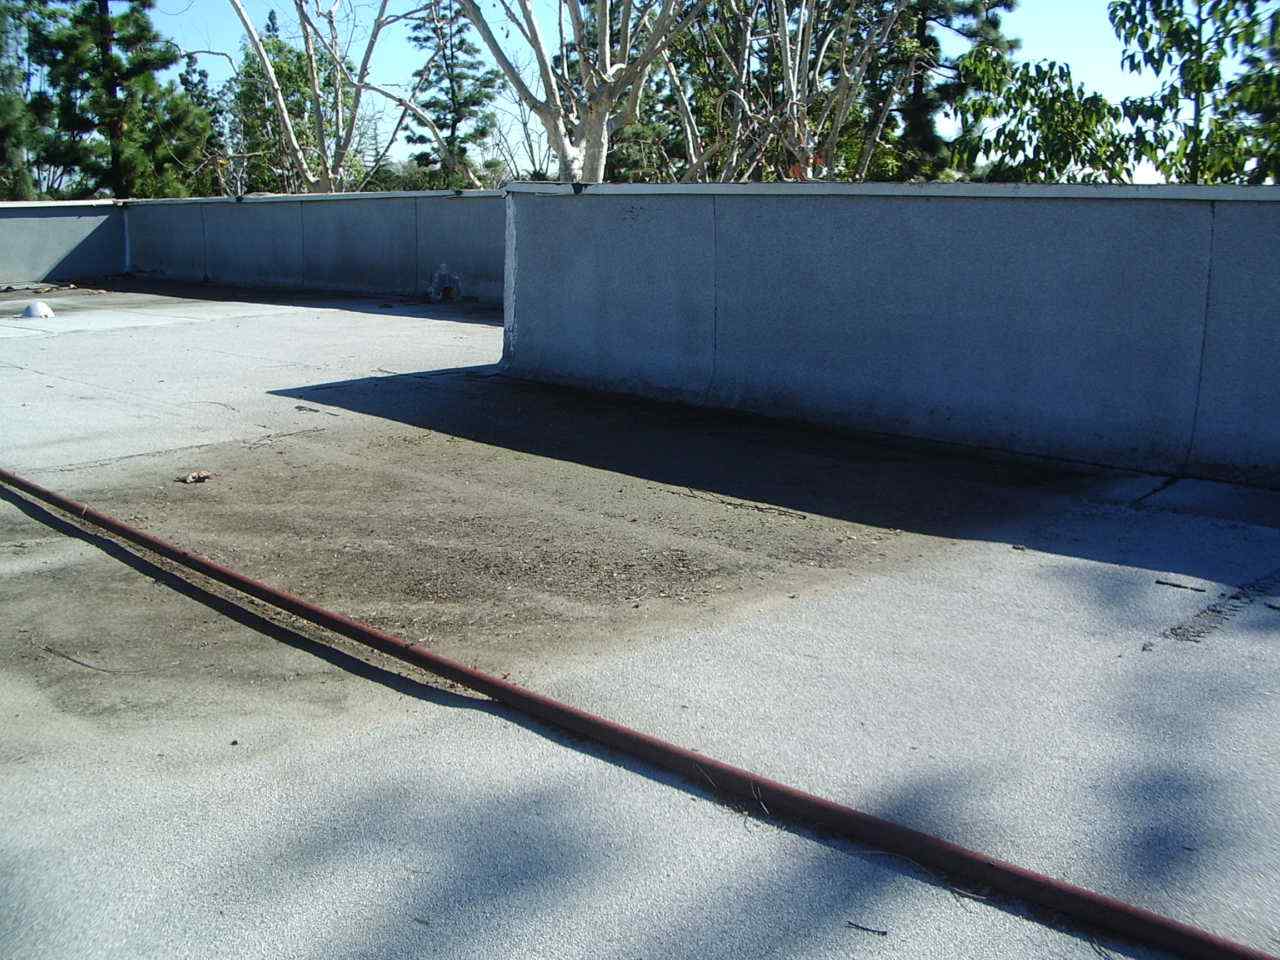 Why Did My Flat Roof Develop Low Spots? - RoofSlope